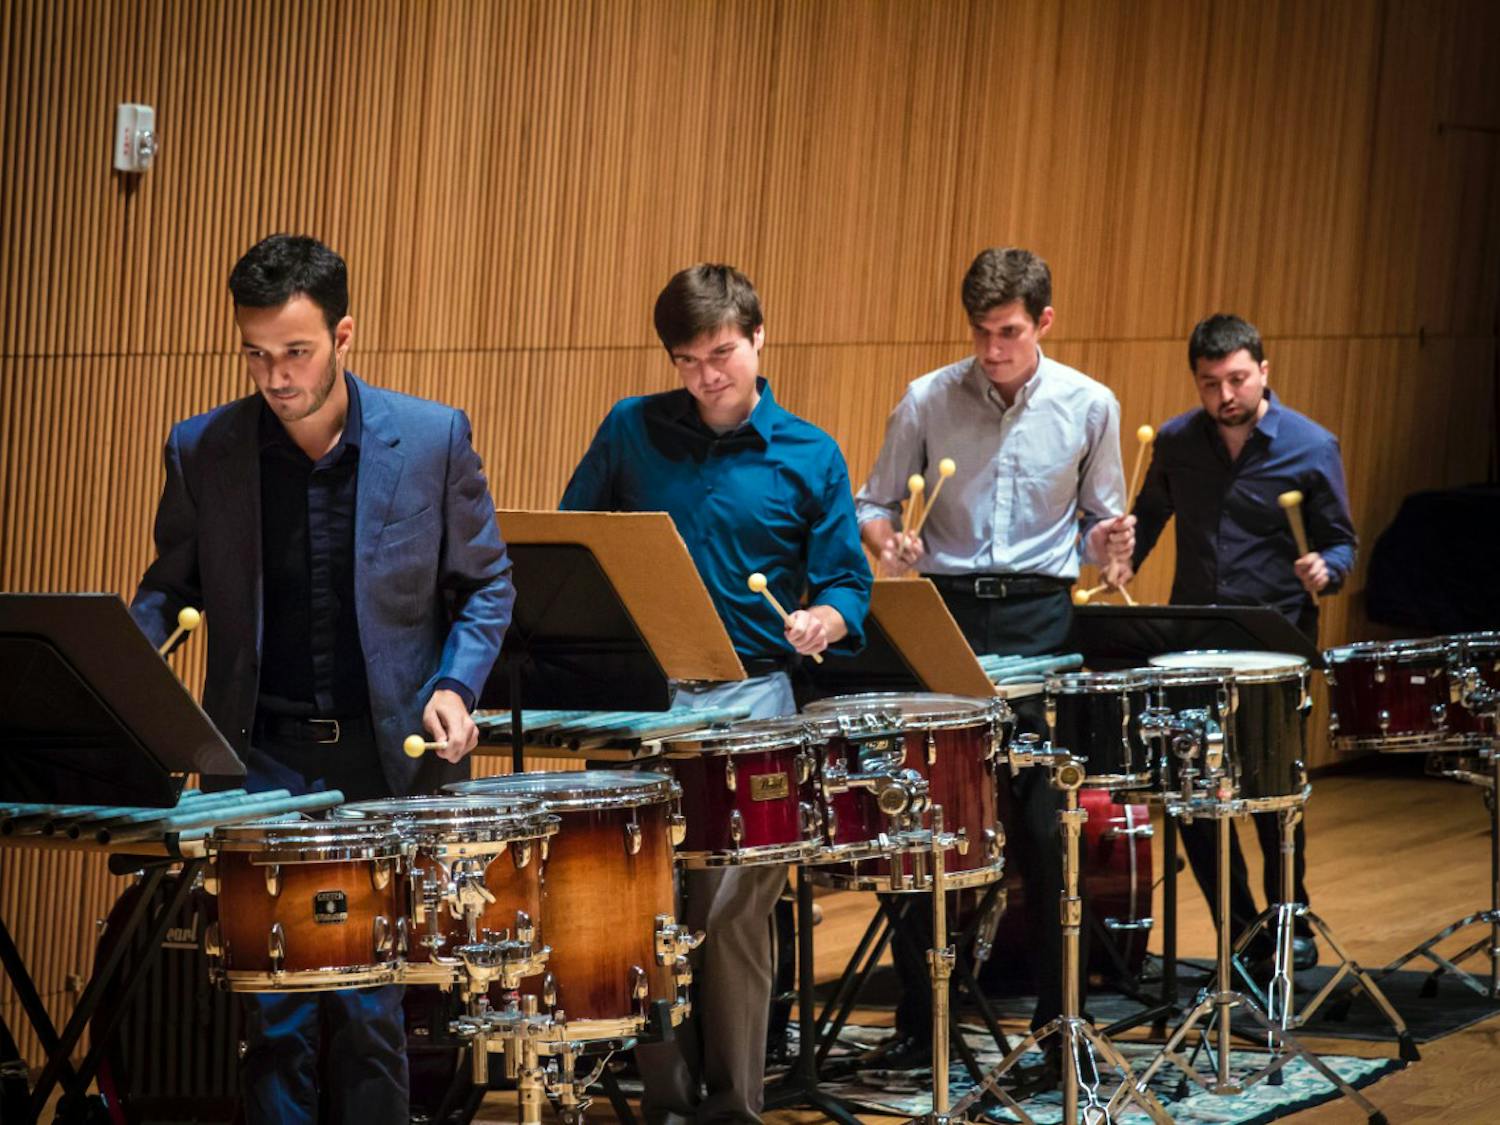 Members of Sandbox Percussion performing in 2014. The group will perform "Seven Pillars," a piece composed by USC alumn, Andy Akiho, on Sept. 9 at 7:30 p.m. in the School of Music Recital Hall.